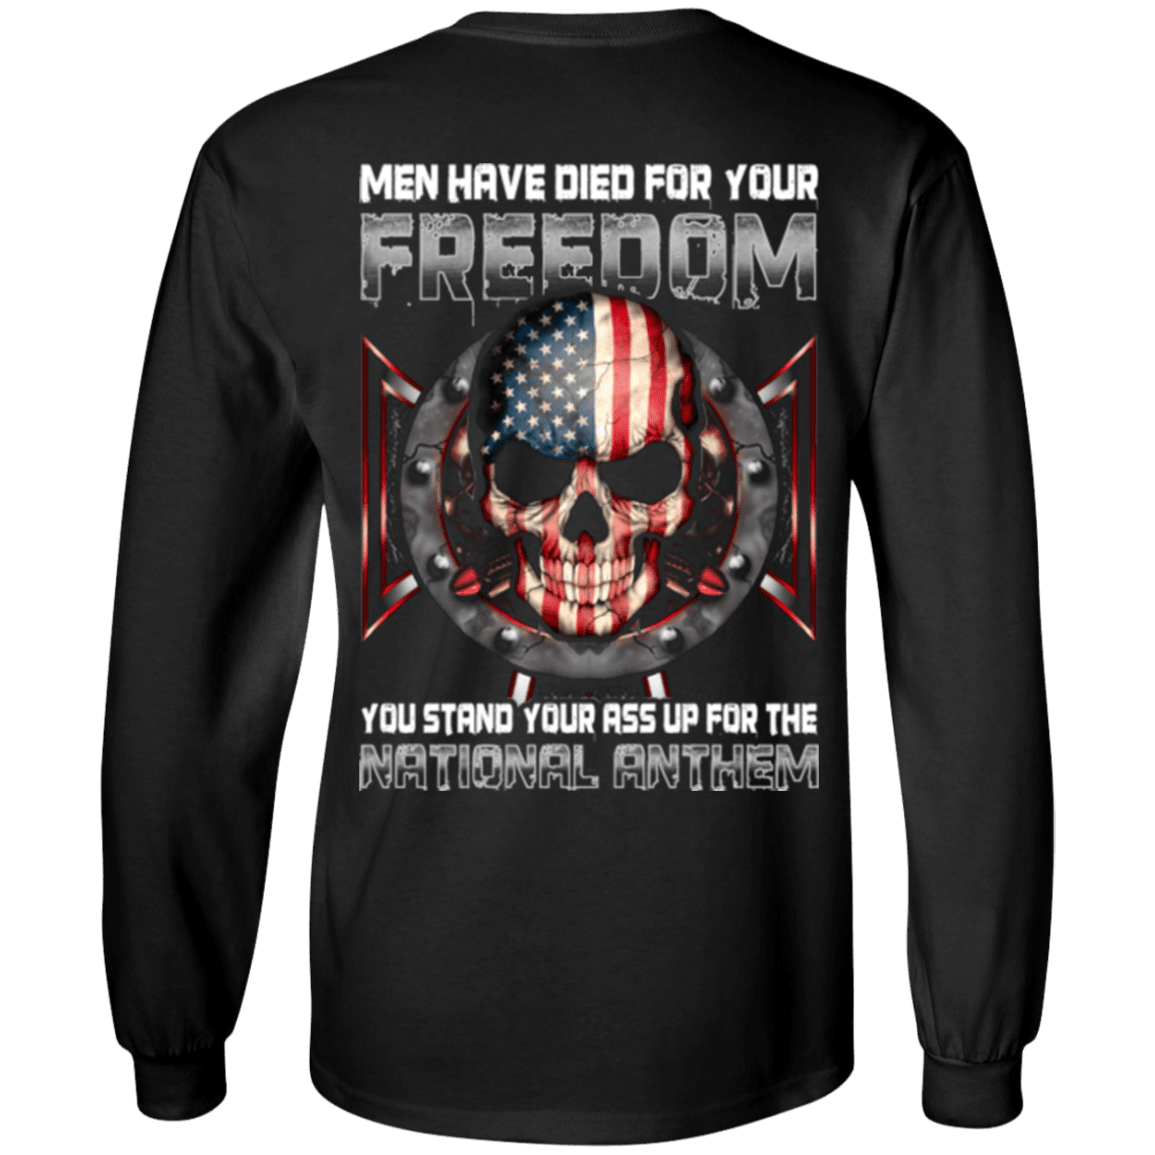 Military T-Shirt "Men Have Died For Youe Freedom Stand Up For The National Anthem"-TShirt-General-Veterans Nation